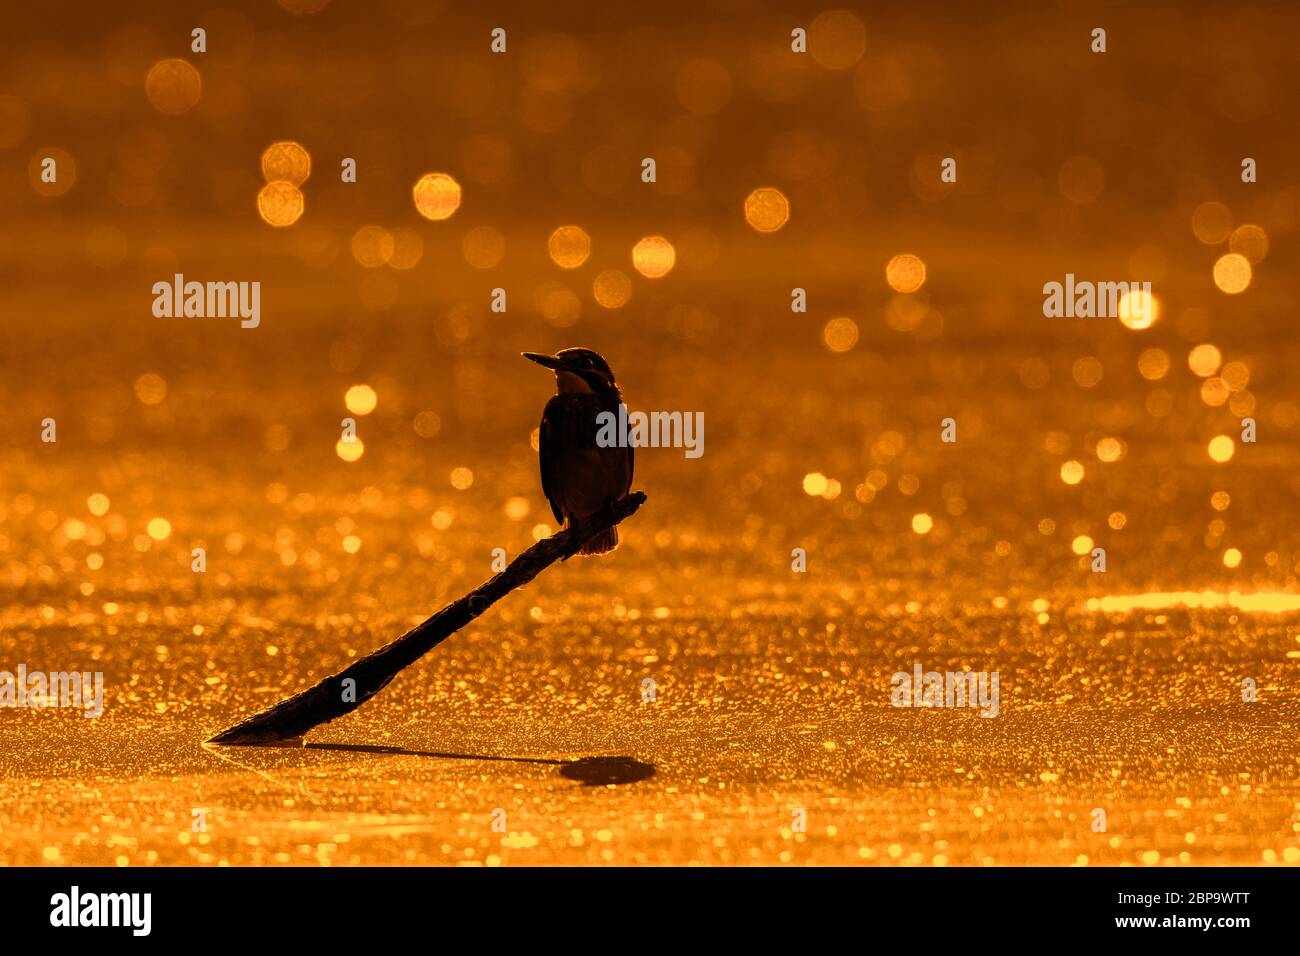 Common kingfisher / Eurasian kingfisher (Alcedo atthis) female perched on branch over water of pond at sunset Stock Photo